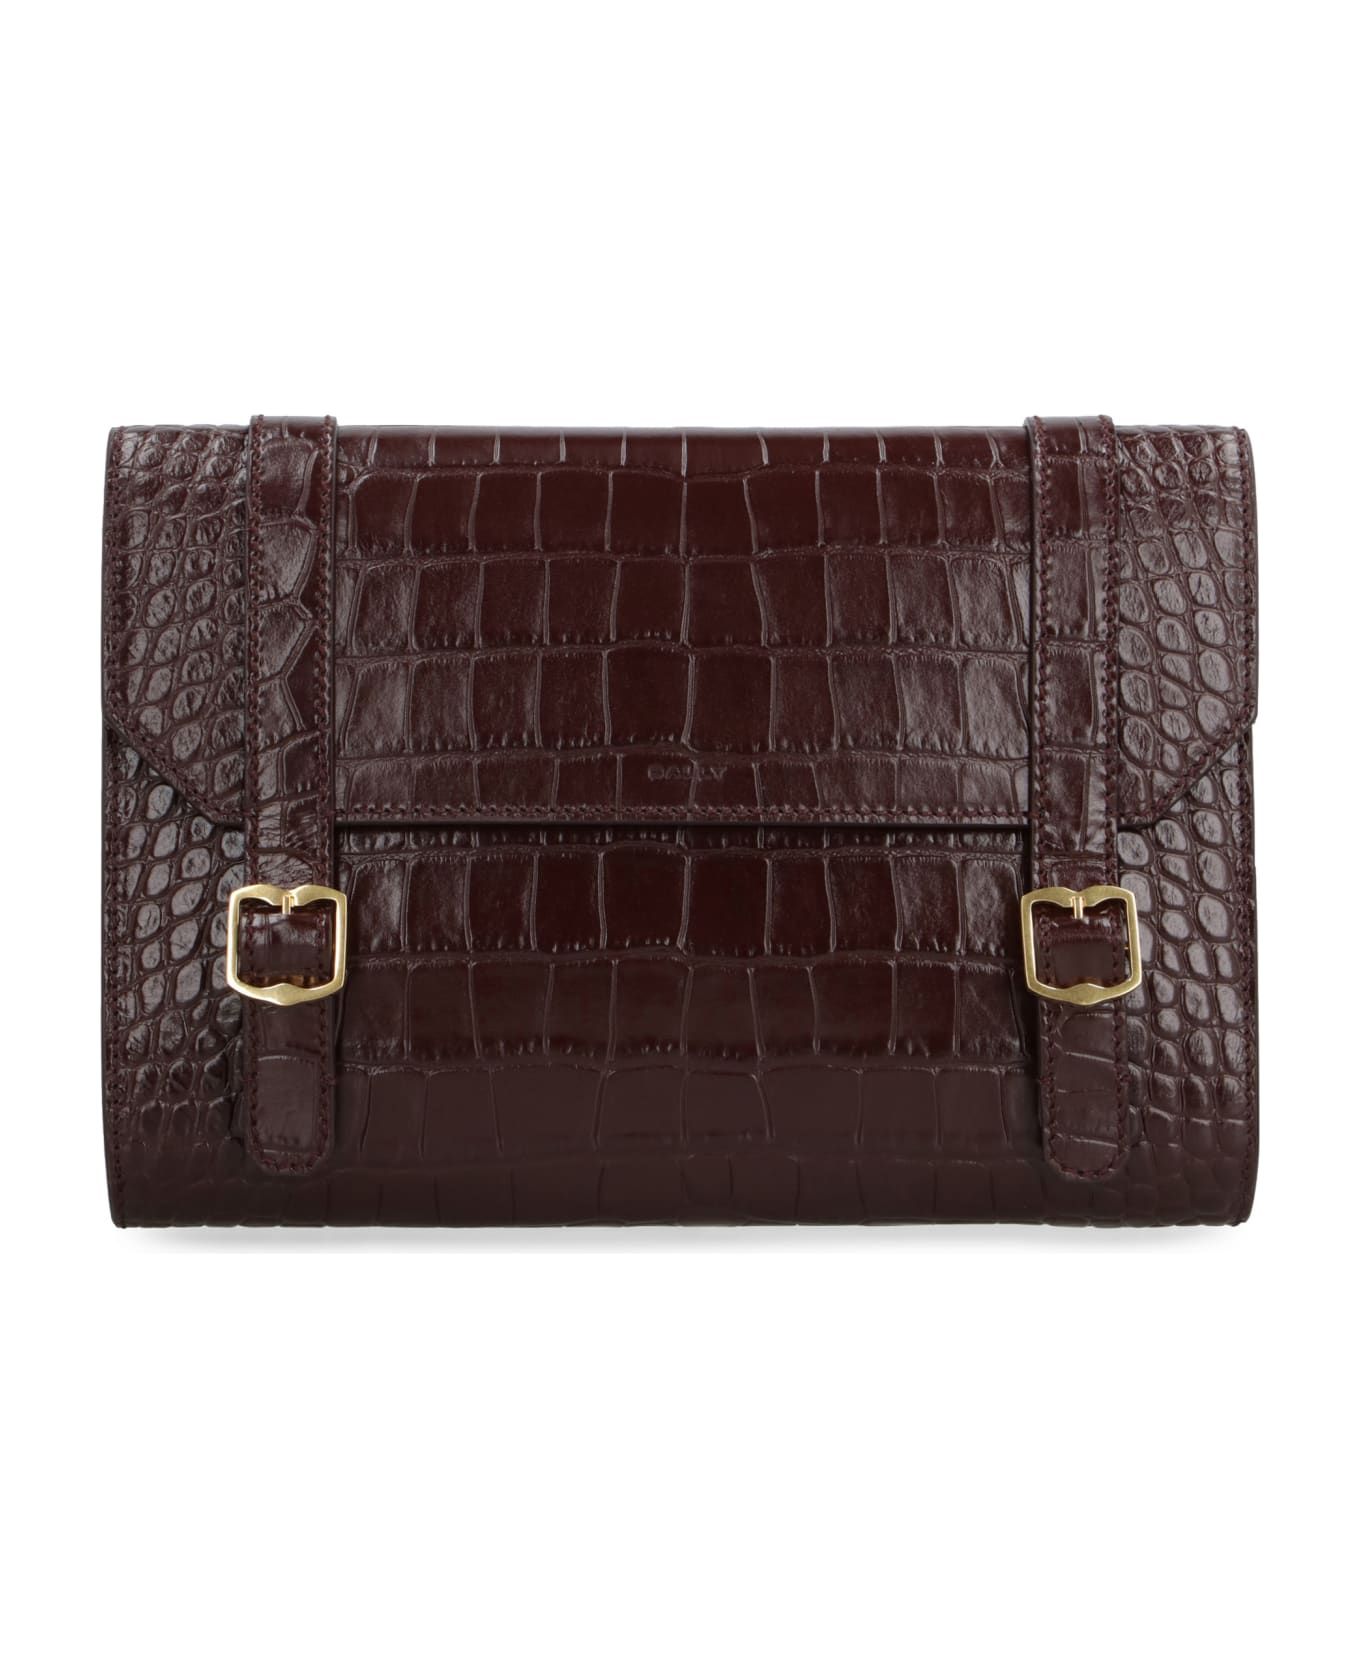 Bally Printed Leather Clutch - brown